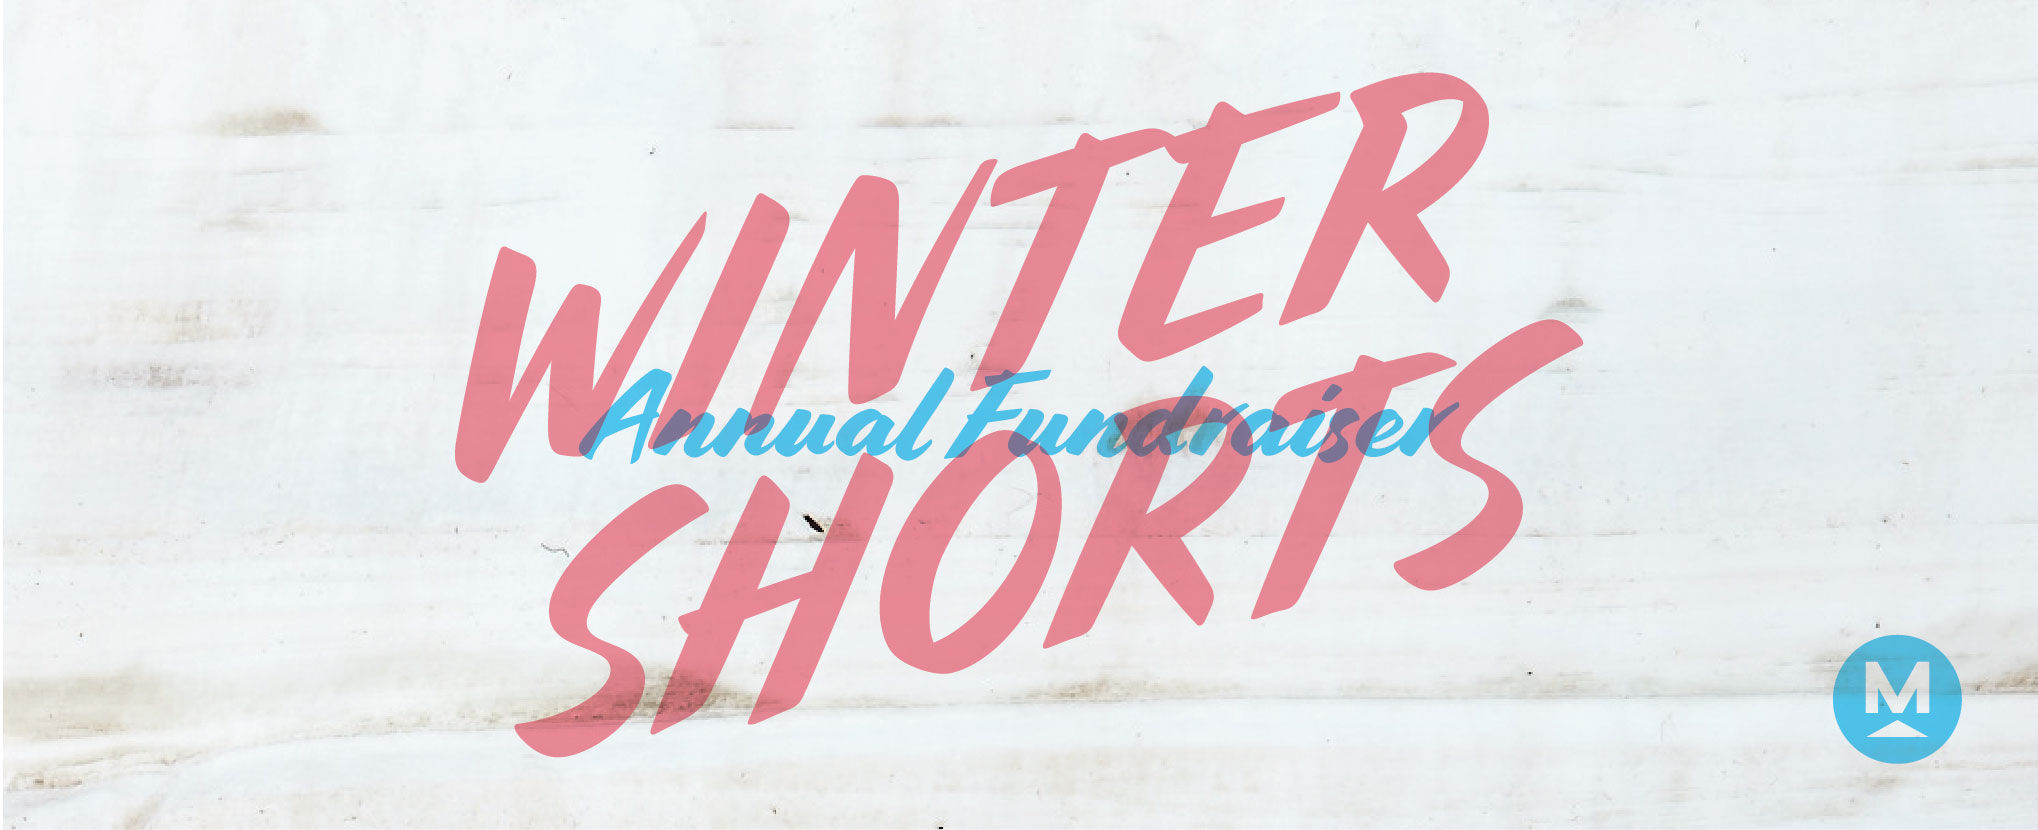 Mountainfilm presents Winter Shorts film program at annual fundraiser